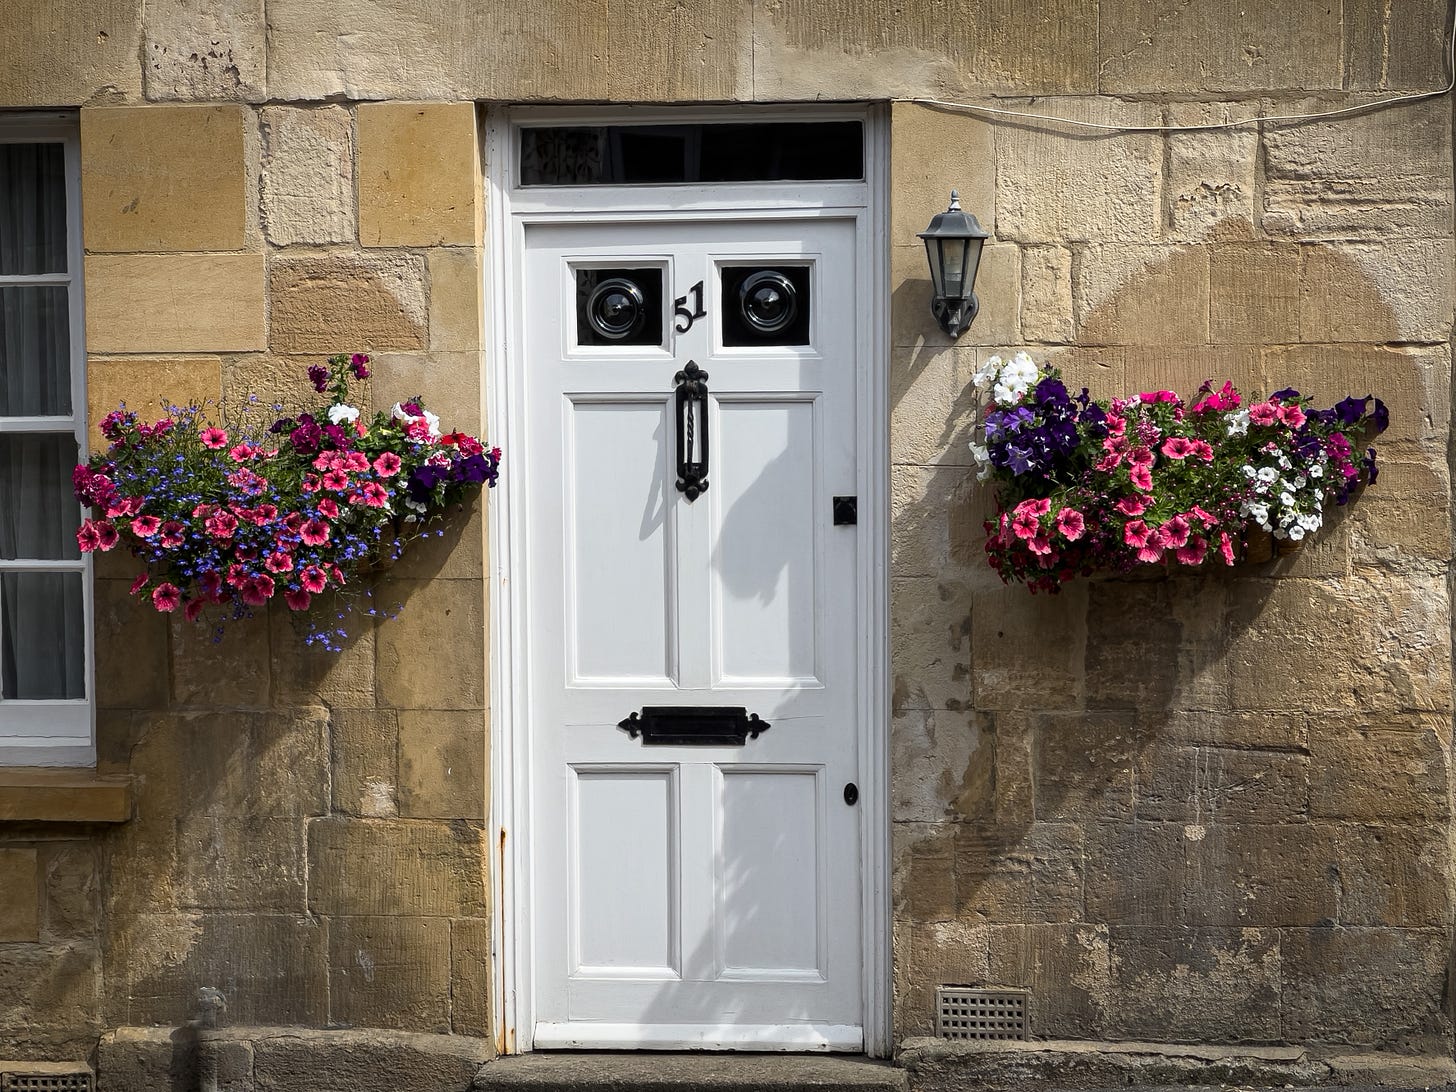 A white wooden fron door with two small windows near the top and the number 51 between the panes, a letter drop is centered on the lower third of the door. Pink, purple, and white petunias flank the door in floor pots adhered to the wall of the yellow-stoned house